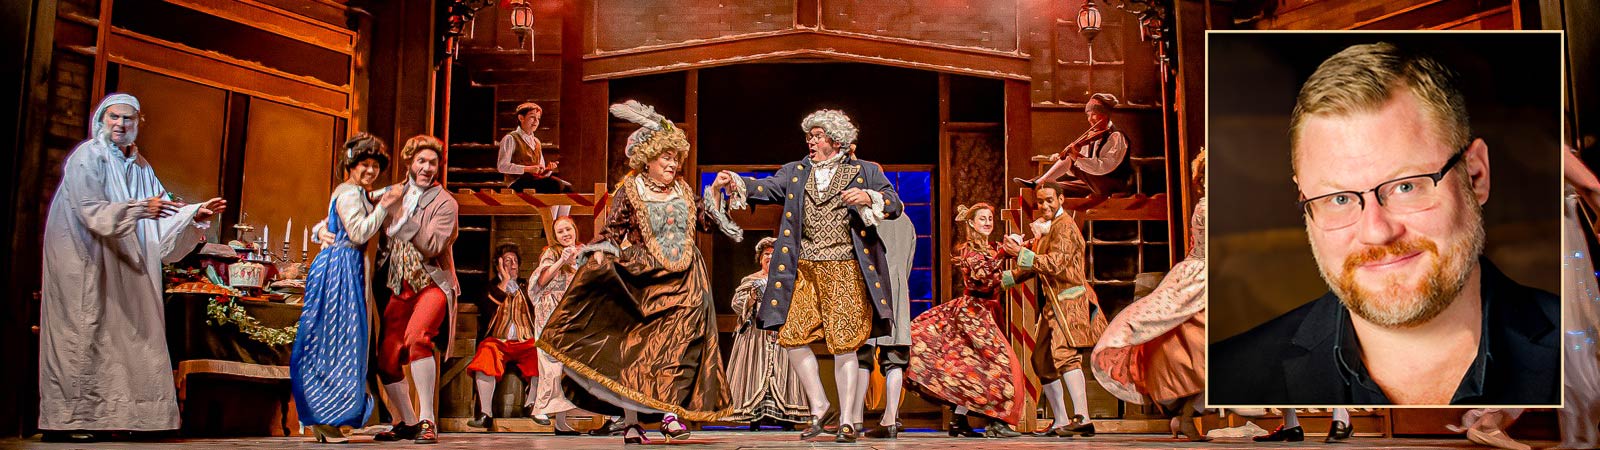 Quin Gresham and a Christmas Carol at the Lyceum Theatre